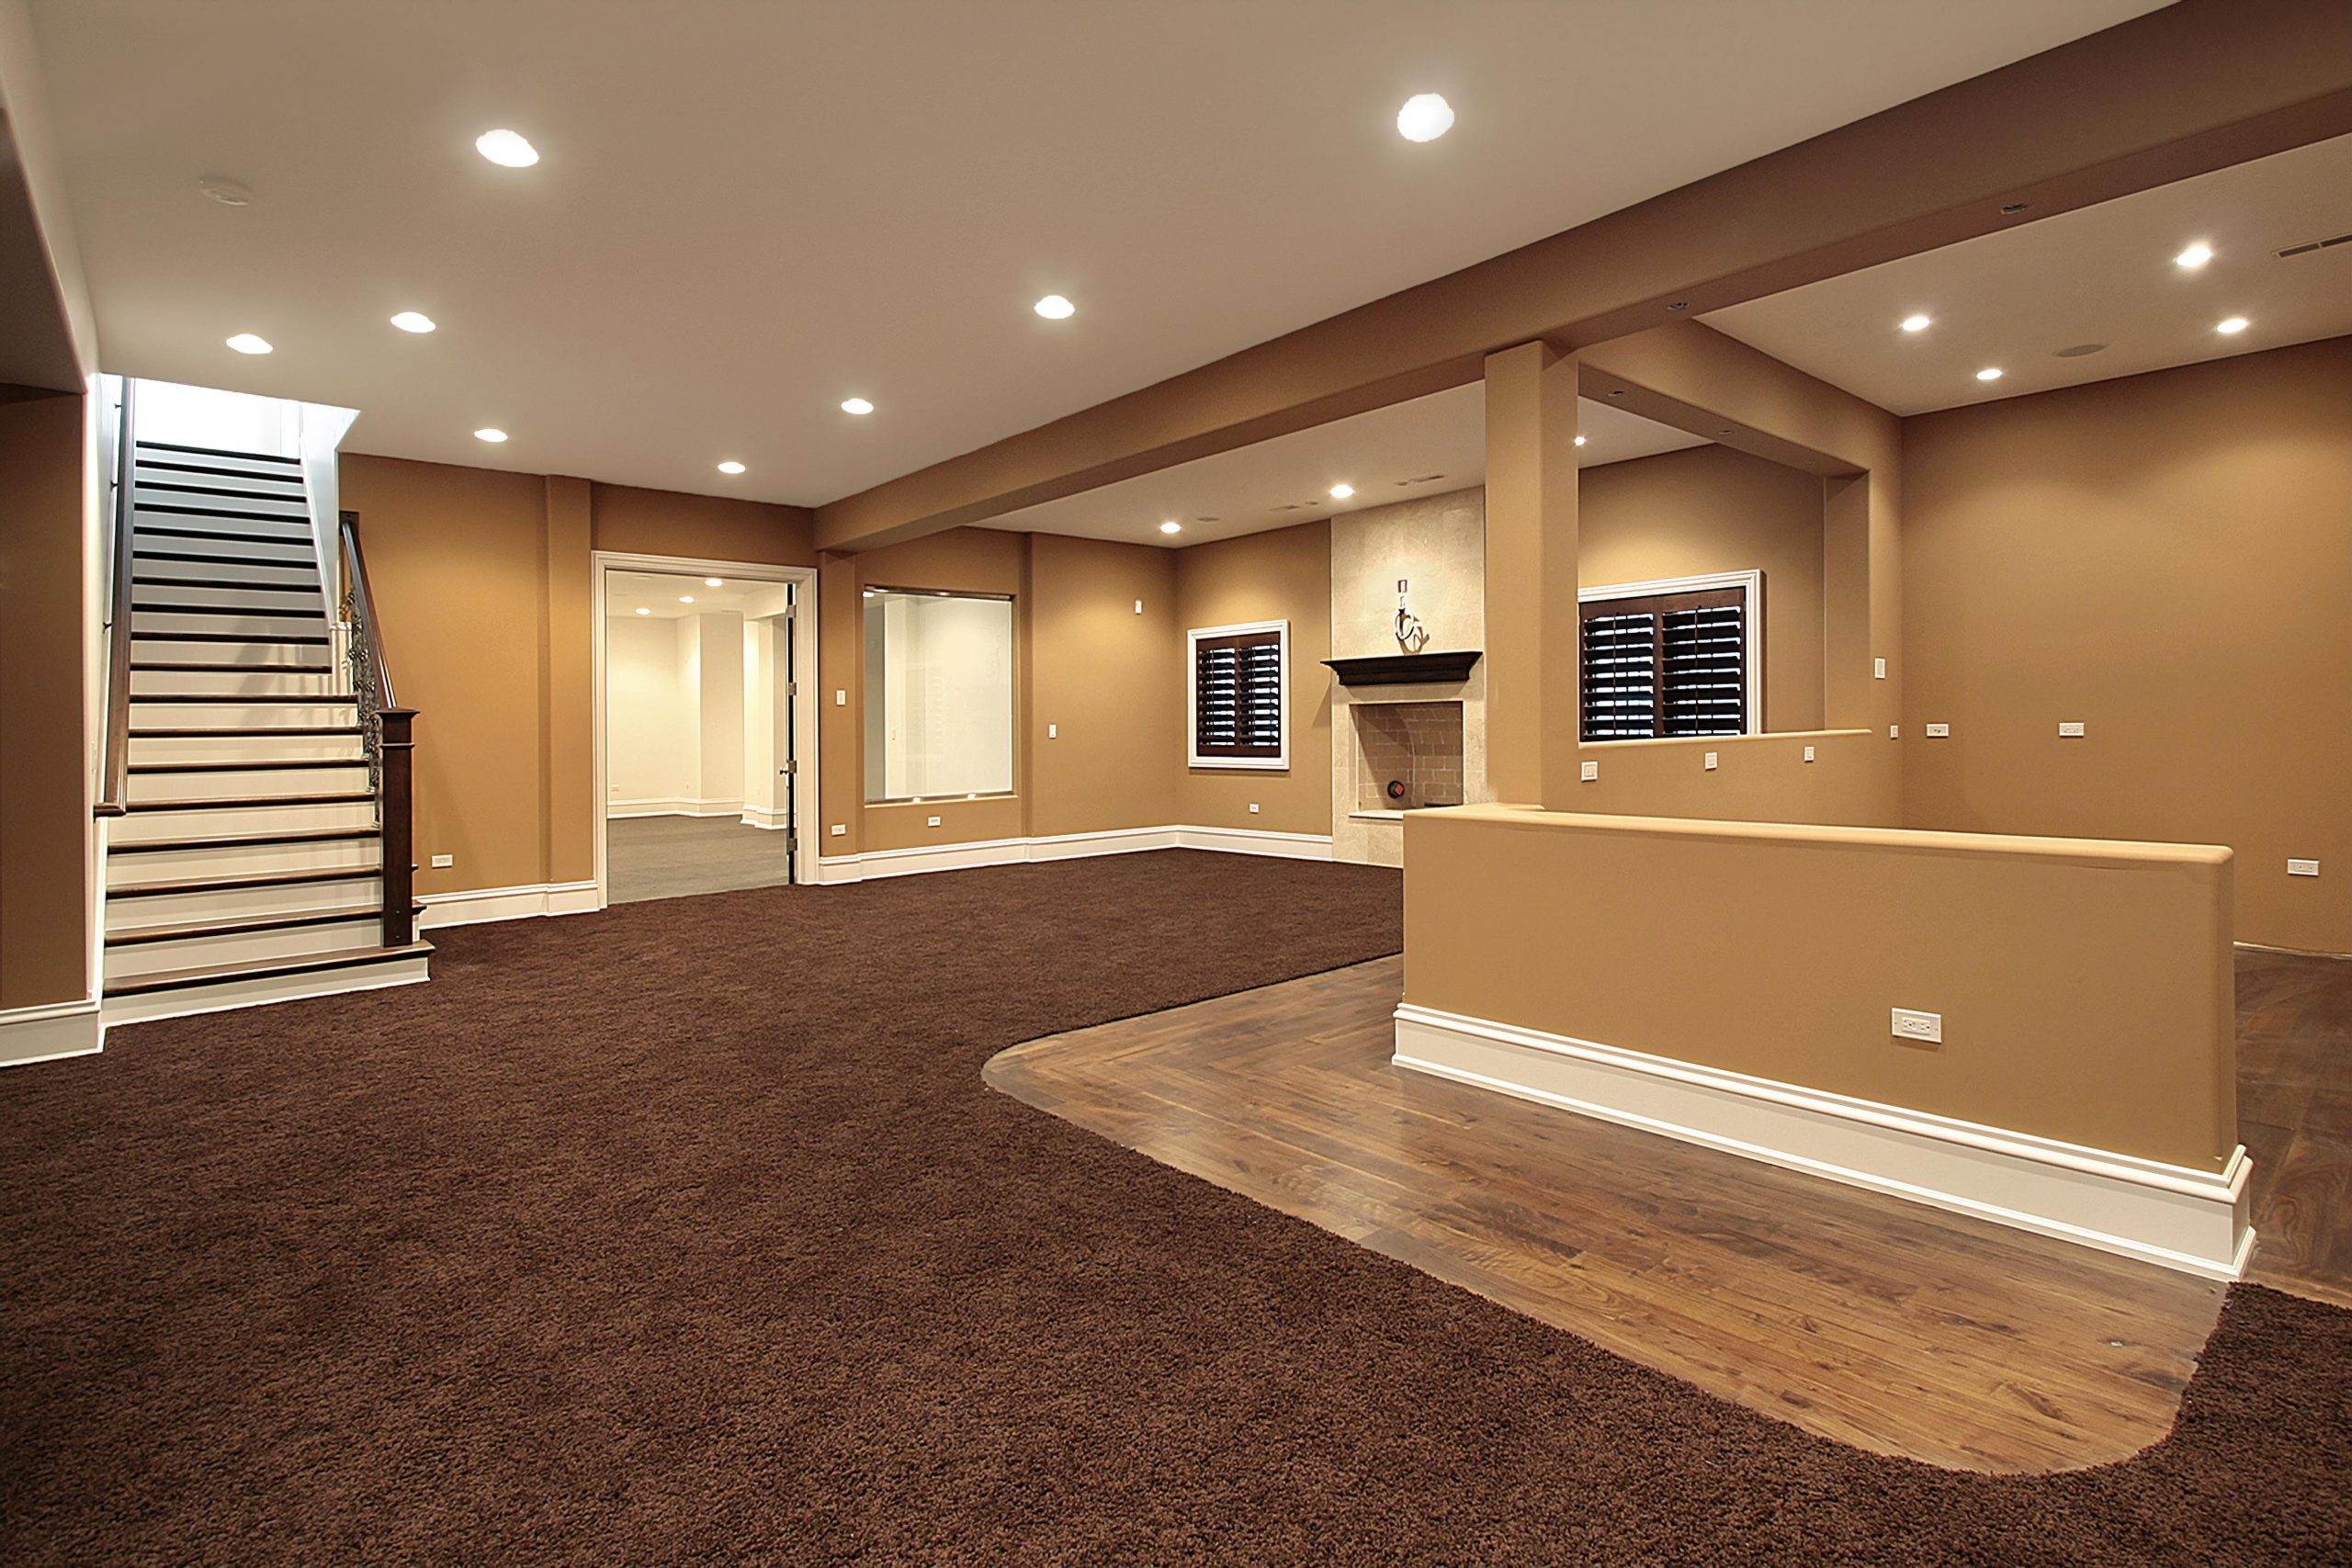 Illegal vs Legal Basement Suite Calgary: A Guide To City Of Calgary Basement Permits